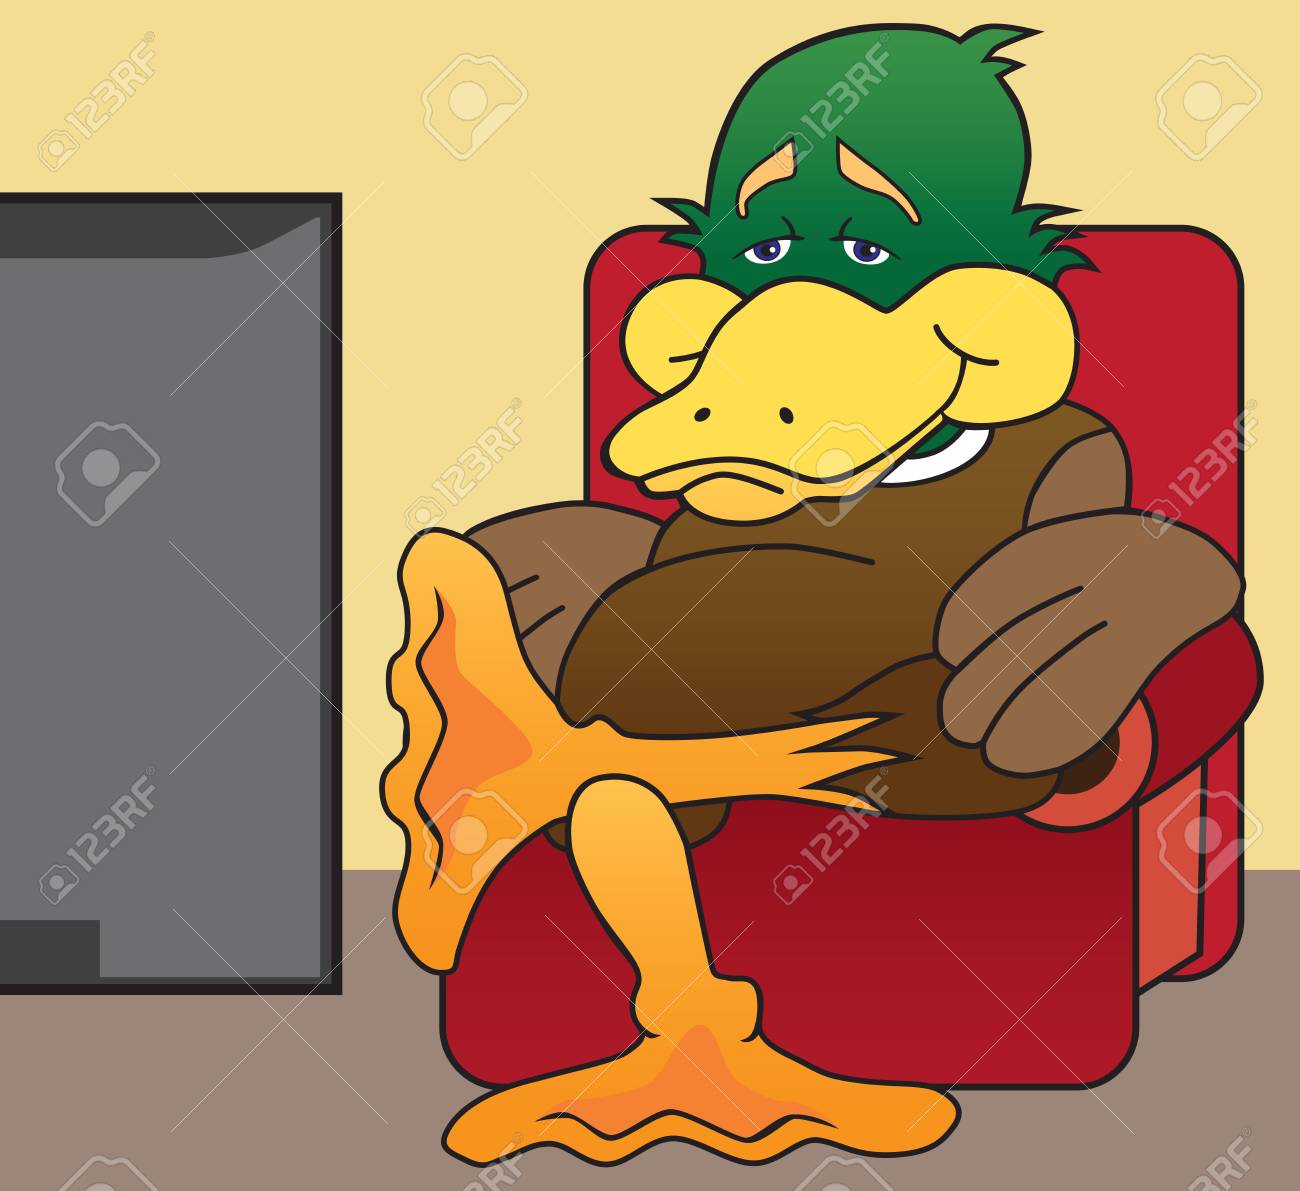 94940208-a-tired-cartoon-duck-is-relaxing-and-watching-tv.jpg